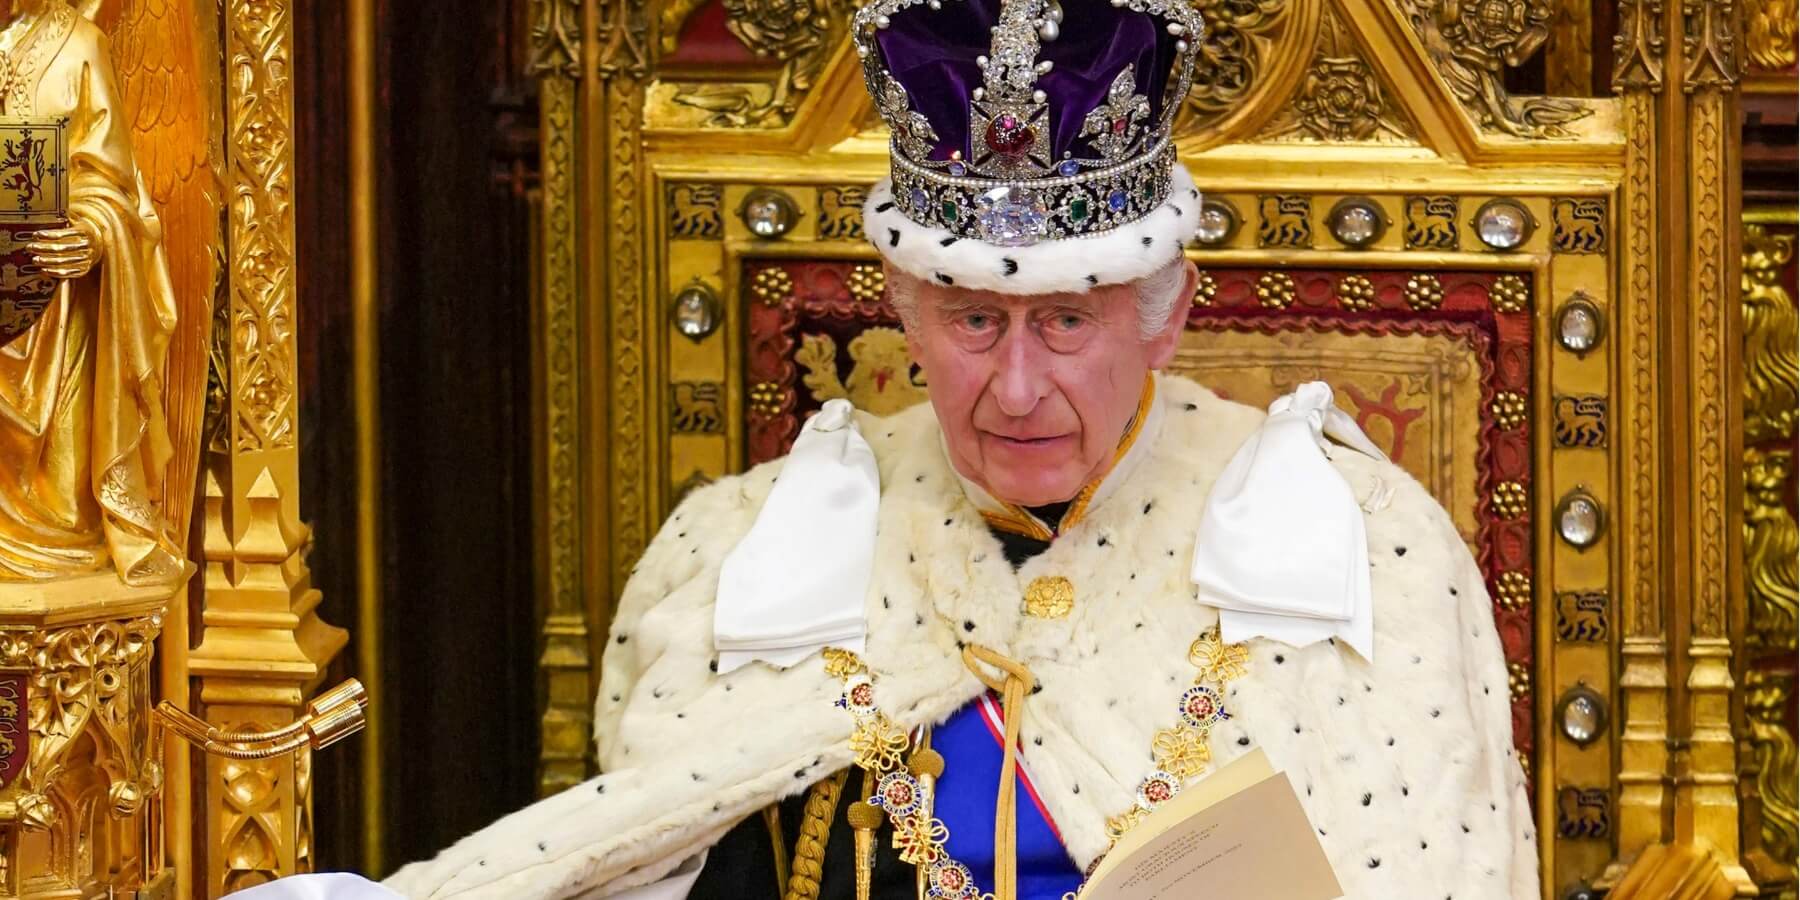 King Charles on the throne for the opening of Parliament in 2023.